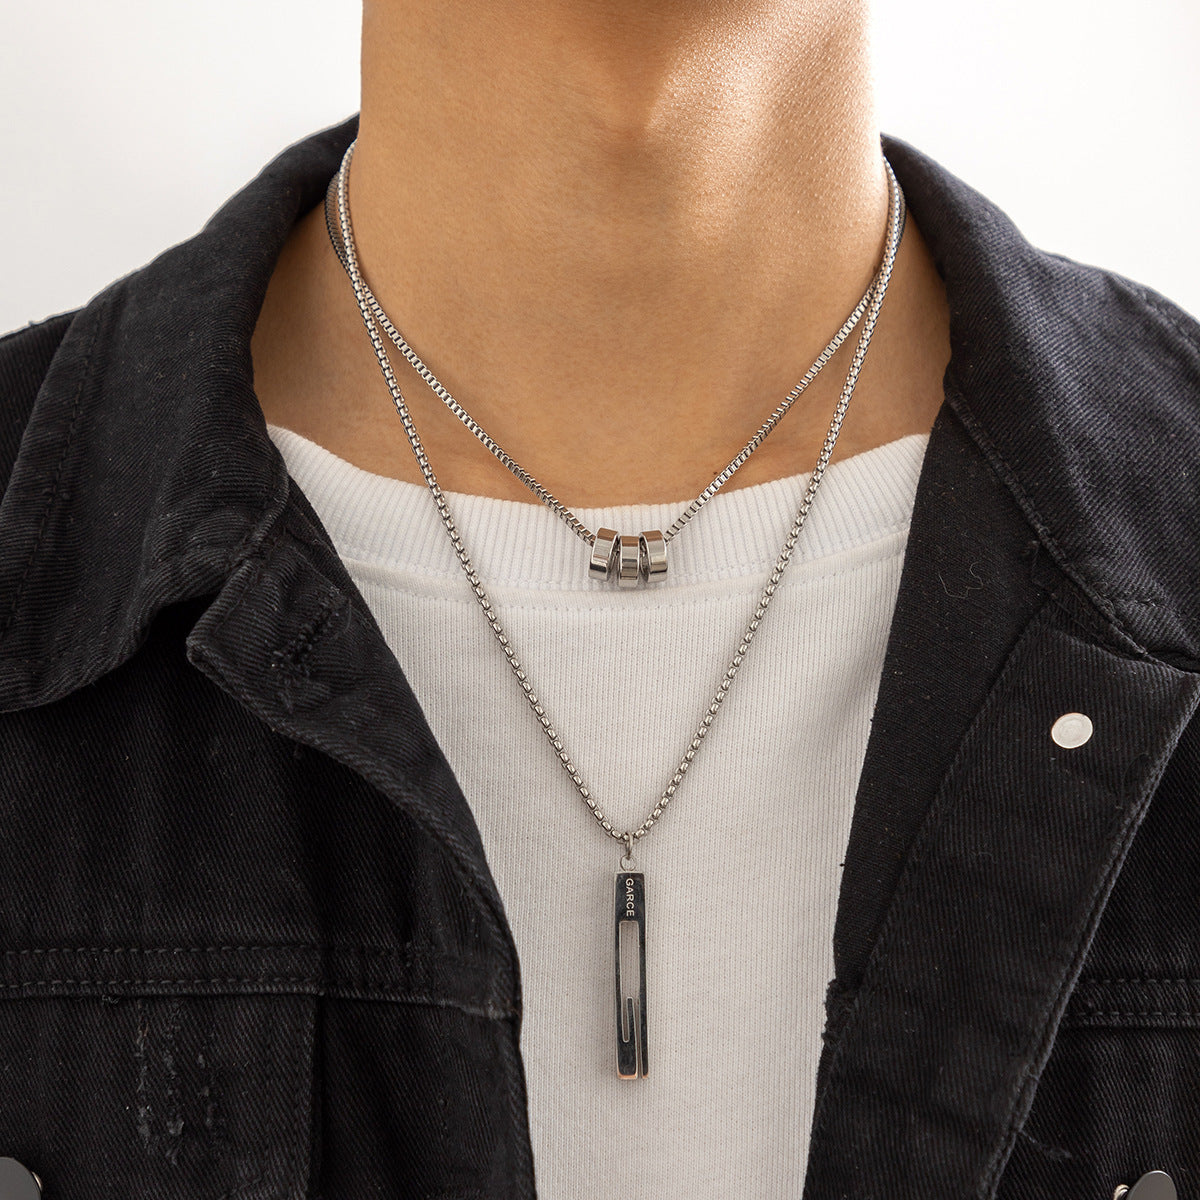 Men Fashionable Long Bar Ring Double Layered Design Hip-Hop Style Necklace